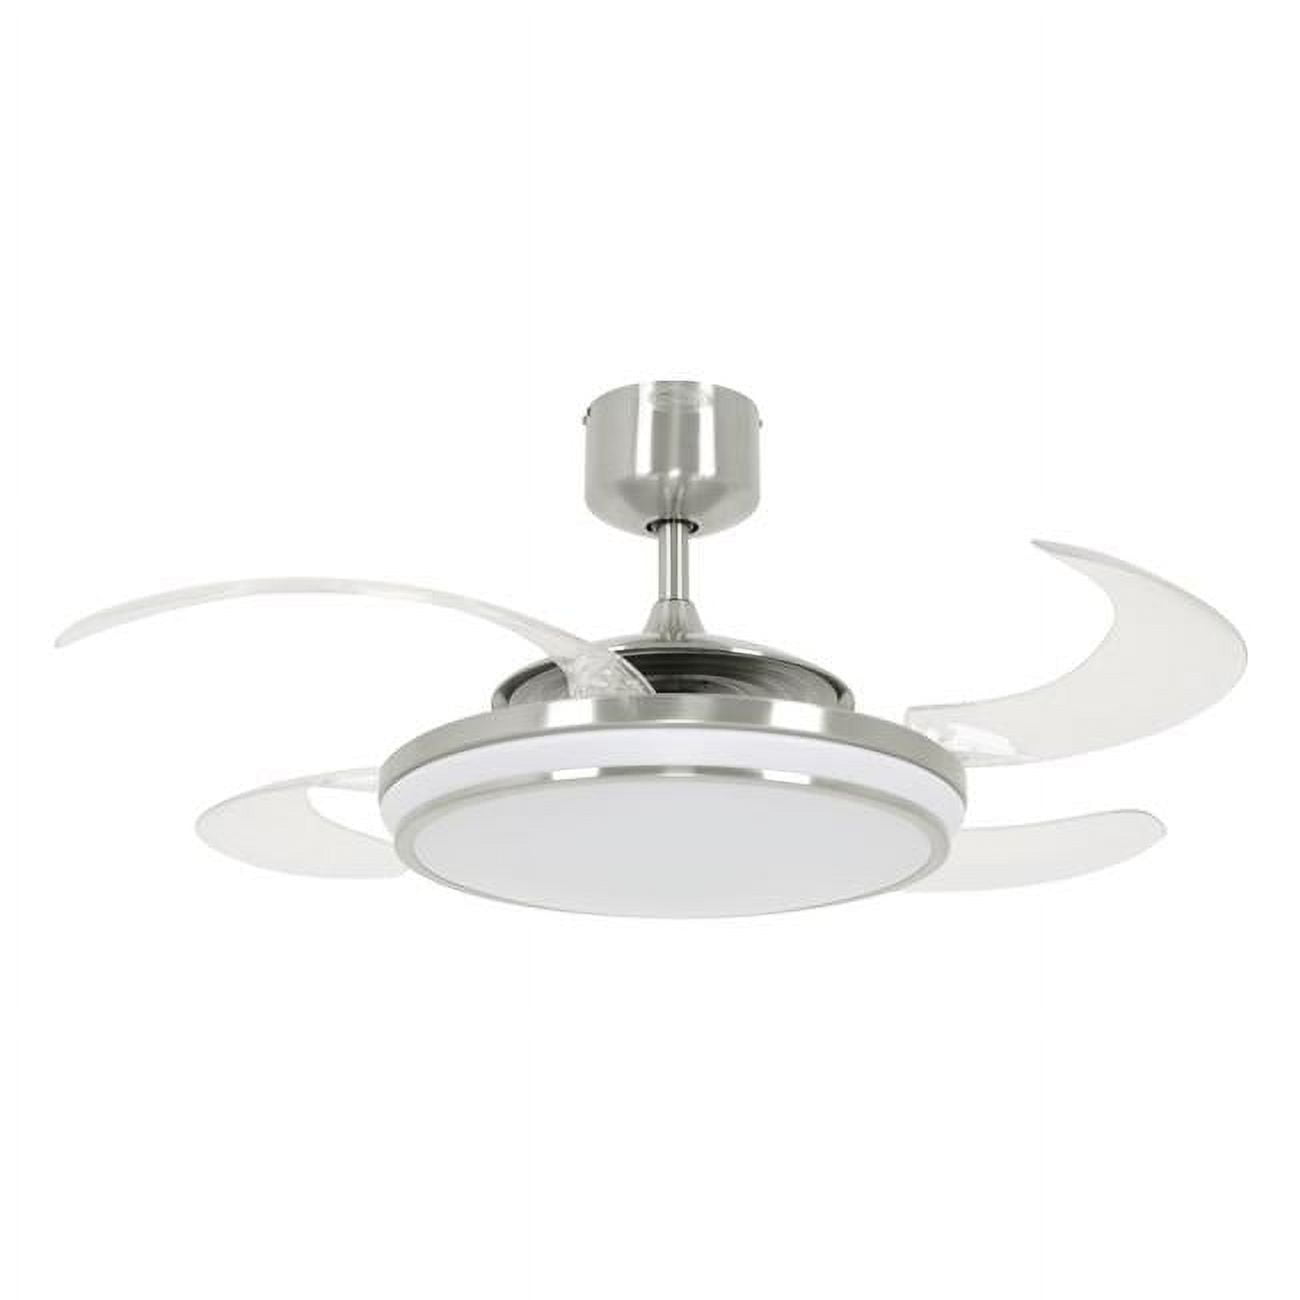 Picture of Fanaway 21103601 EVO 1 Brushed Chrome LED Lighting with Remote Ceiling Fan